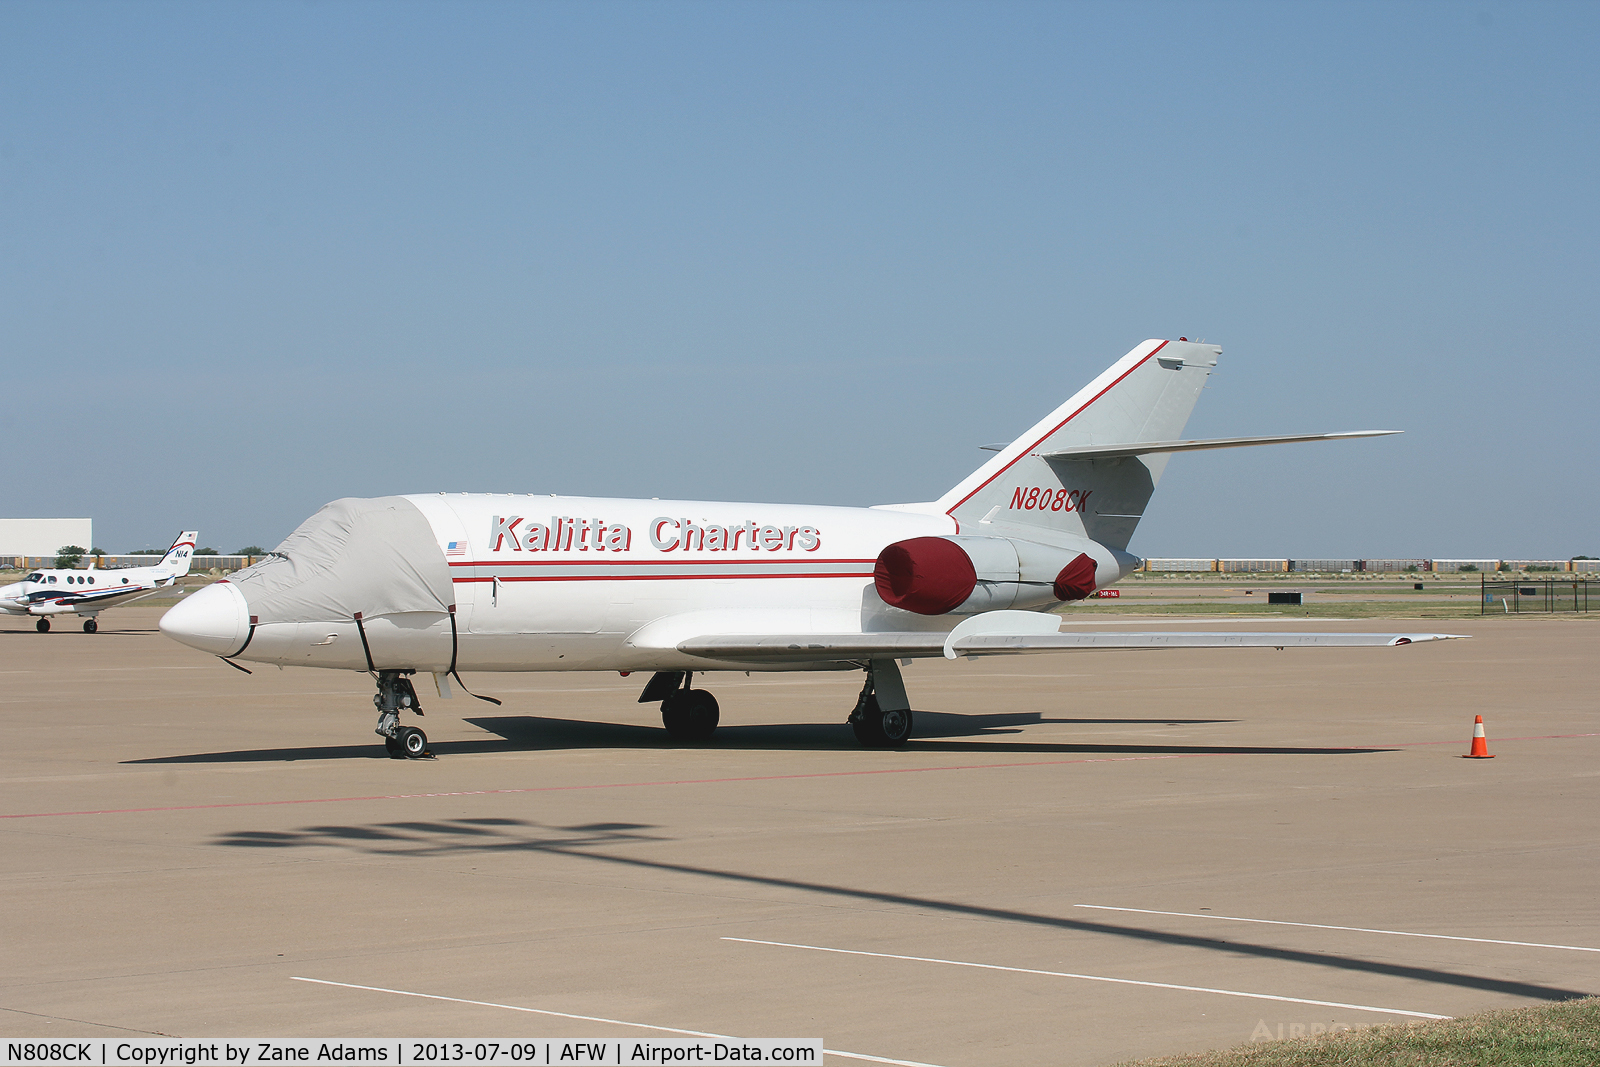 N808CK, 1967 Dassault Falcon (Mystere) 20DC C/N 108, Kalitta Charters at Alliance Airport